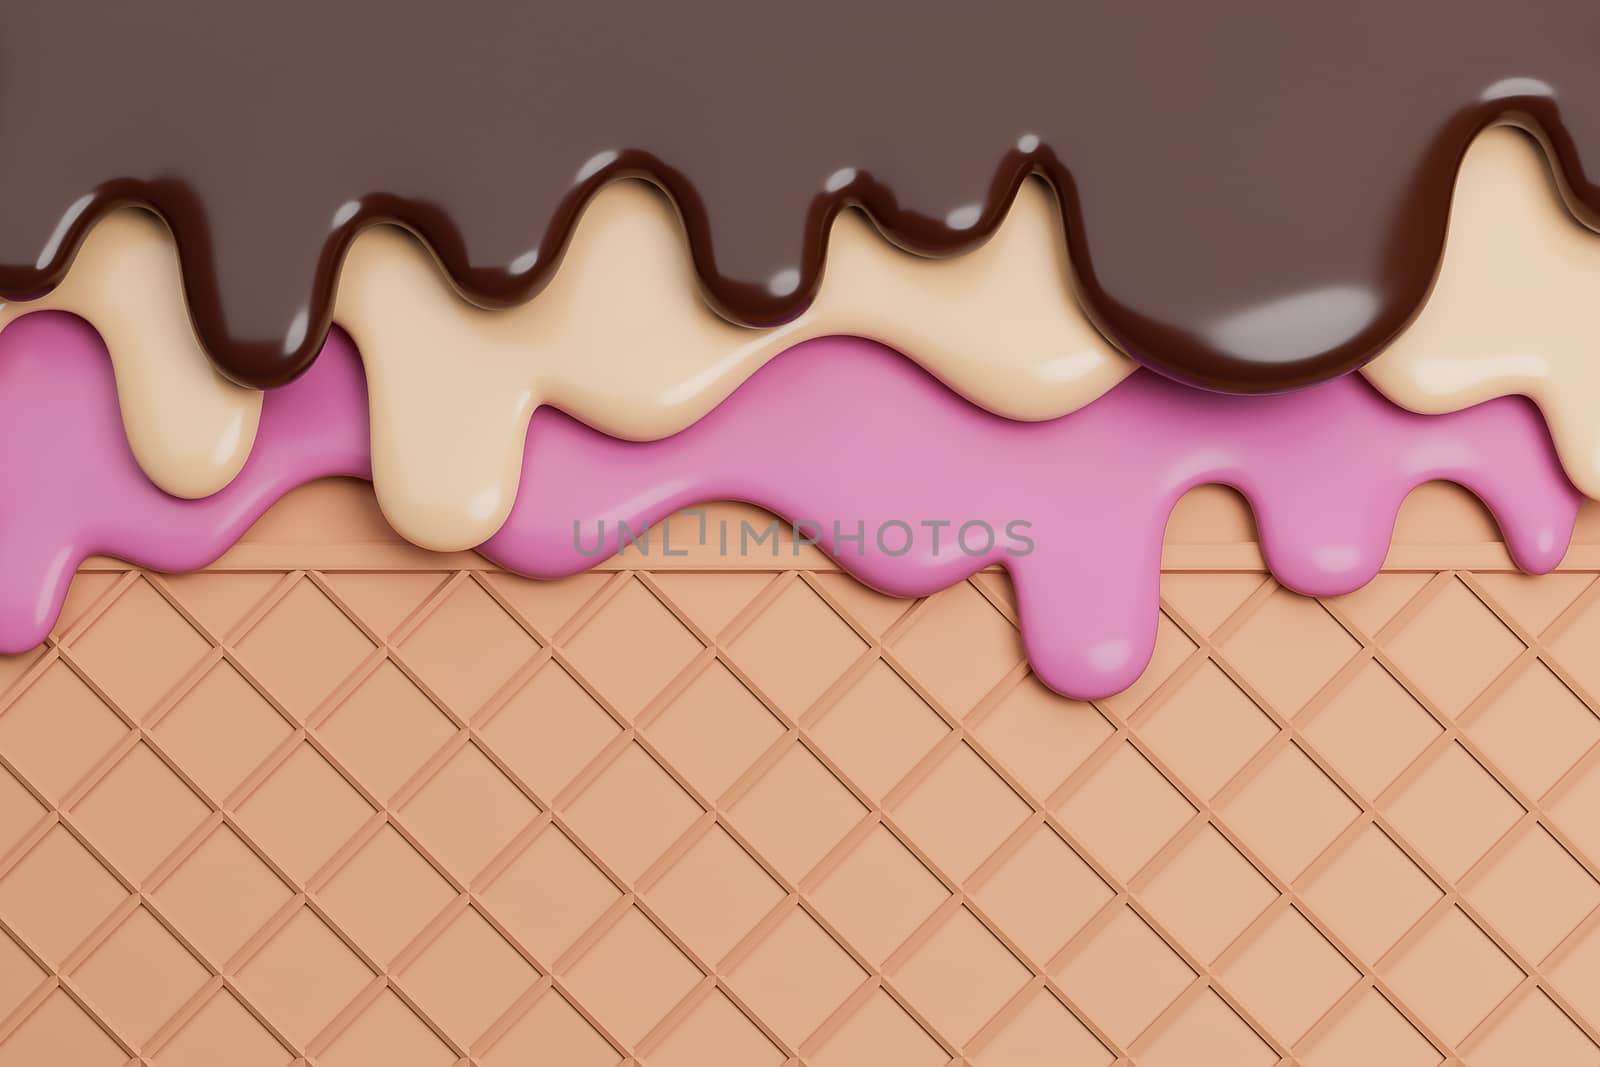 Chocolate and Vanilla and Strawbery Ice Cream Melted on Wafer Background.,3d model and illustration. by anotestocker